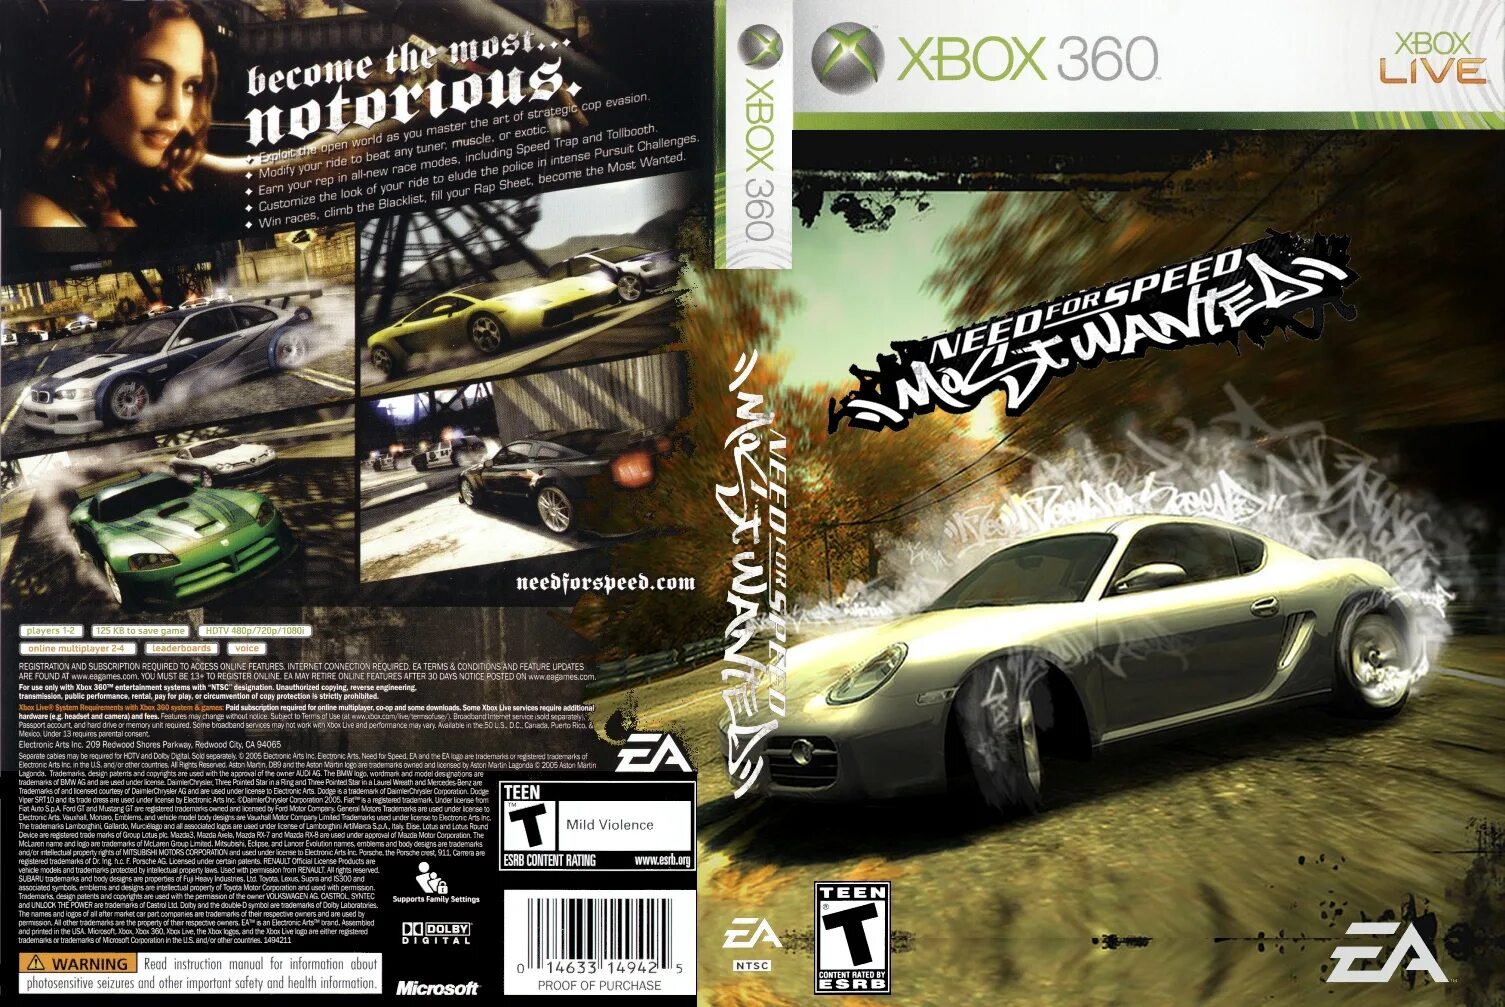 NFS MW 2005 Xbox 360. Xbox 360 most wanted Classic диск. Need for Speed most wanted Xbox 360 диск. Need for Speed most wanted Xbox 360 обложка. Nfs most wanted xbox